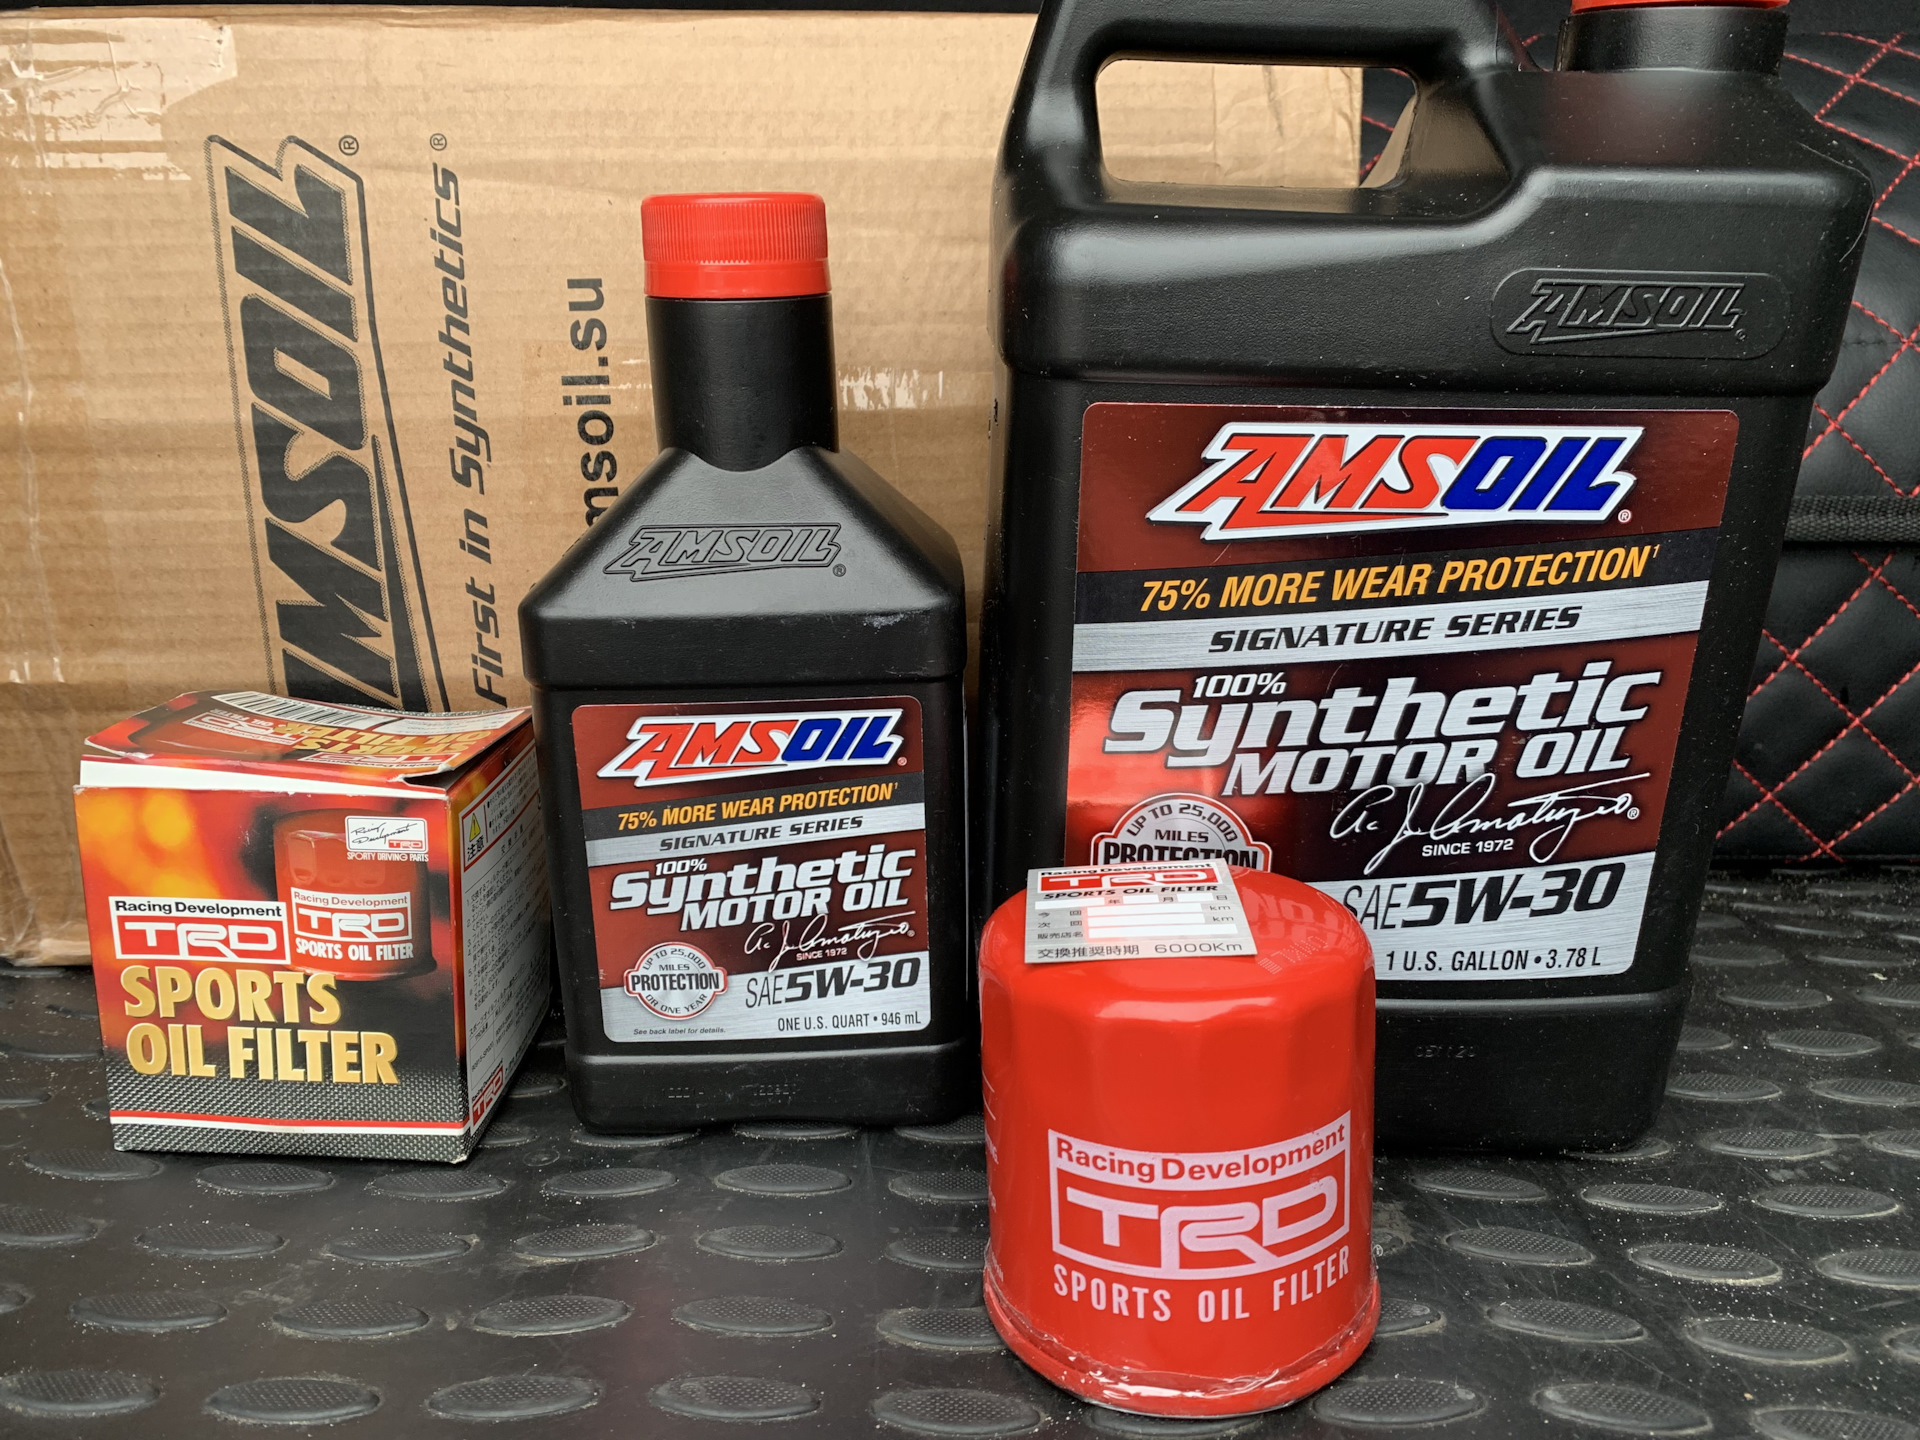 Amsoil signature series synthetic. AMSOIL 5w30. Масло AMSOIL 5w30. AMSOIL g3506s. AMSOIL Signature Series 5w-30.